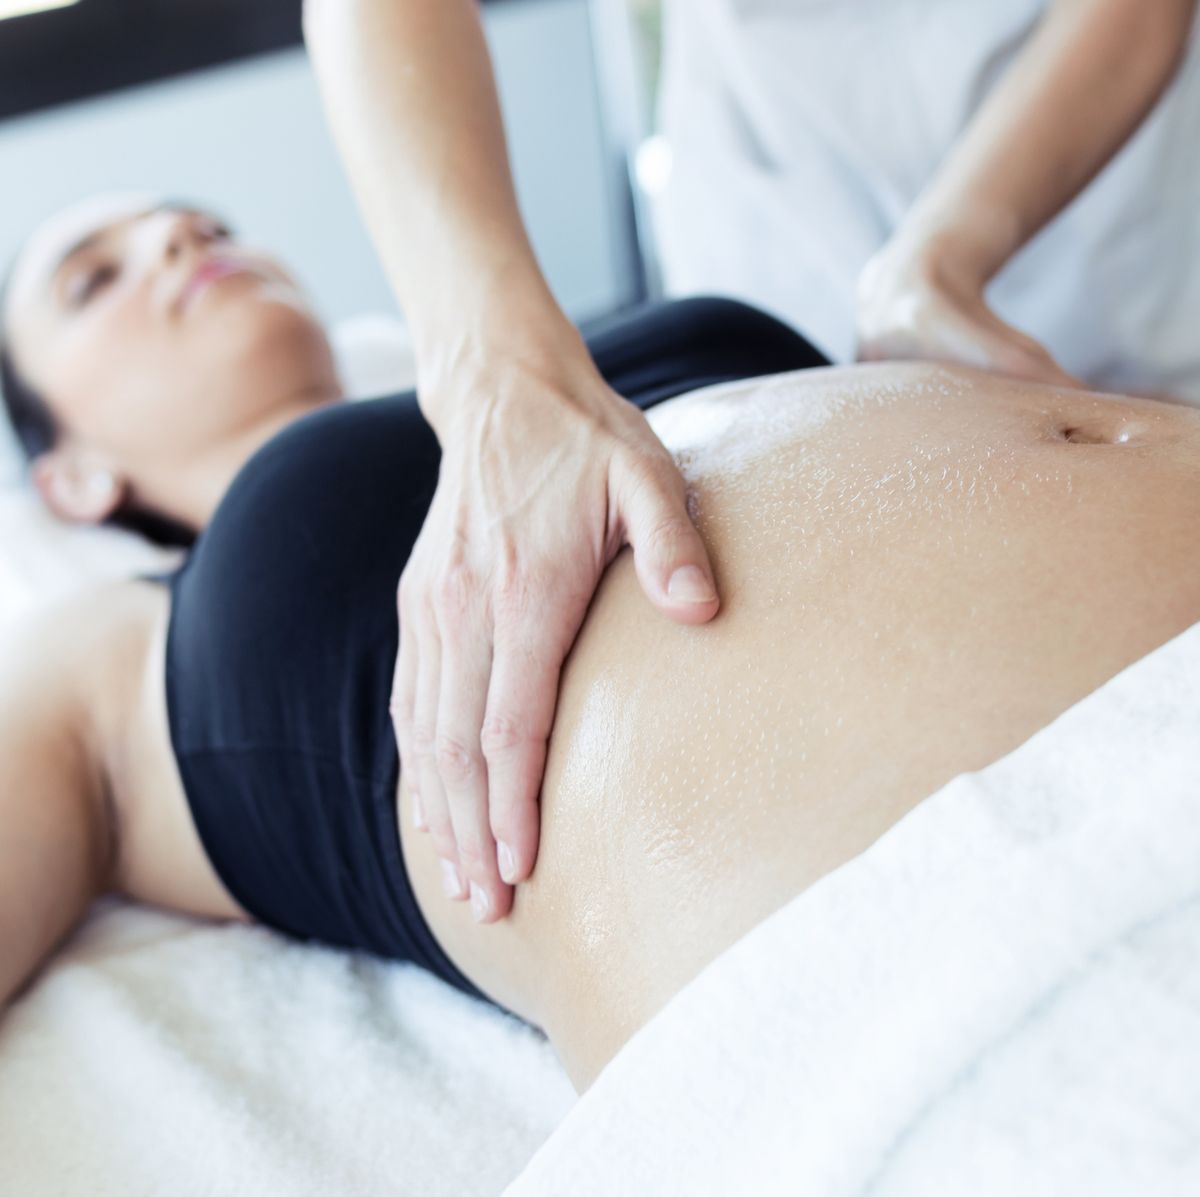 Where Not to Massage a Pregnant Woman: Areas to Avoid